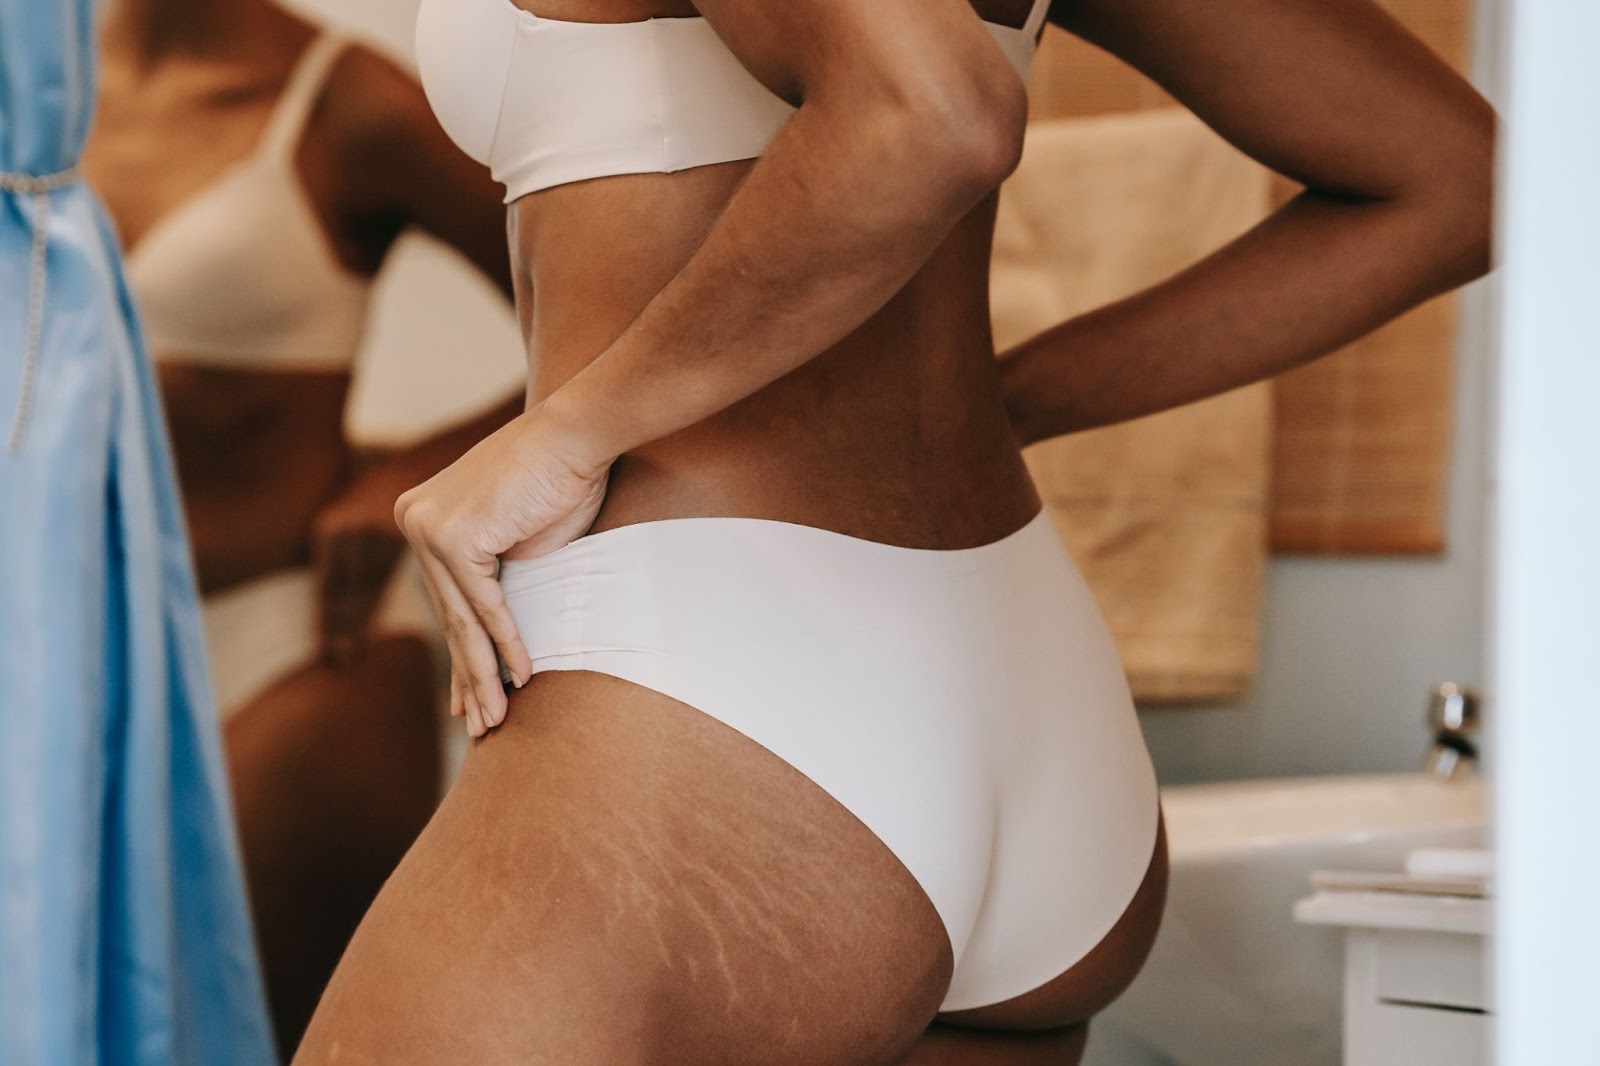 What are the best fabrics to hide pesky cellulite on your legs and thighs?